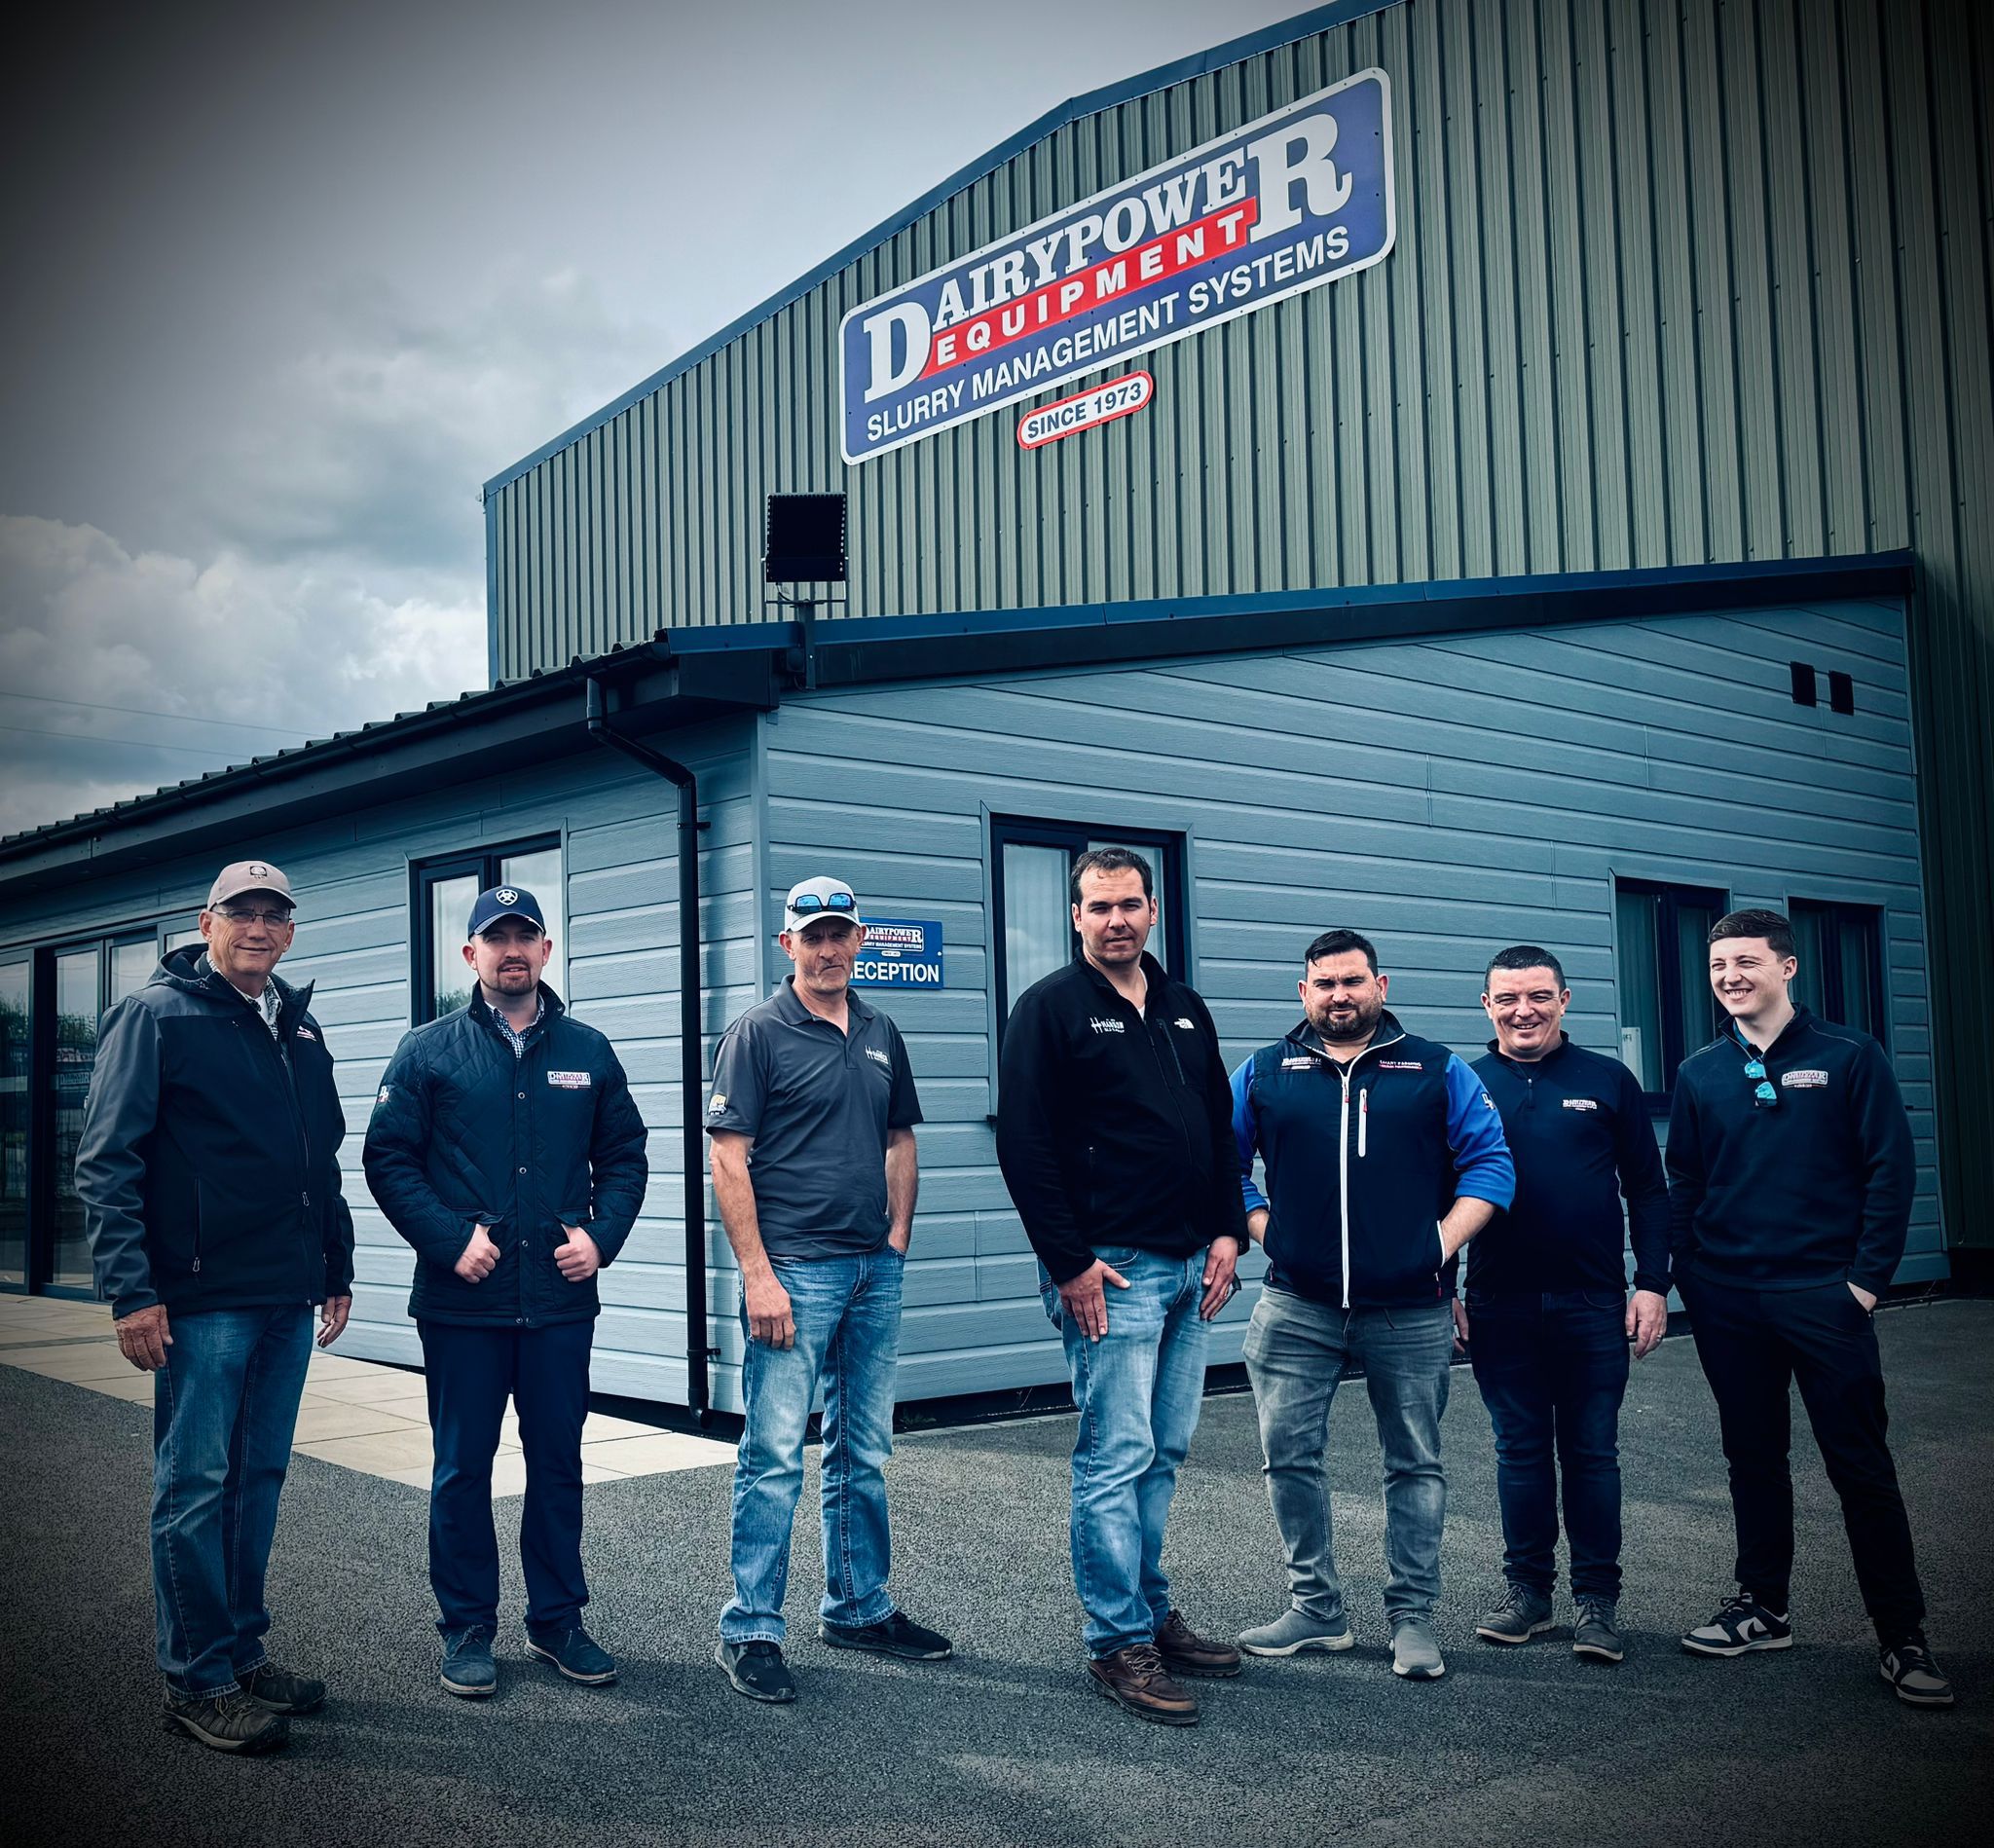 The team visiting the Dairypower UK Headquarters in Fishguard, Wales.